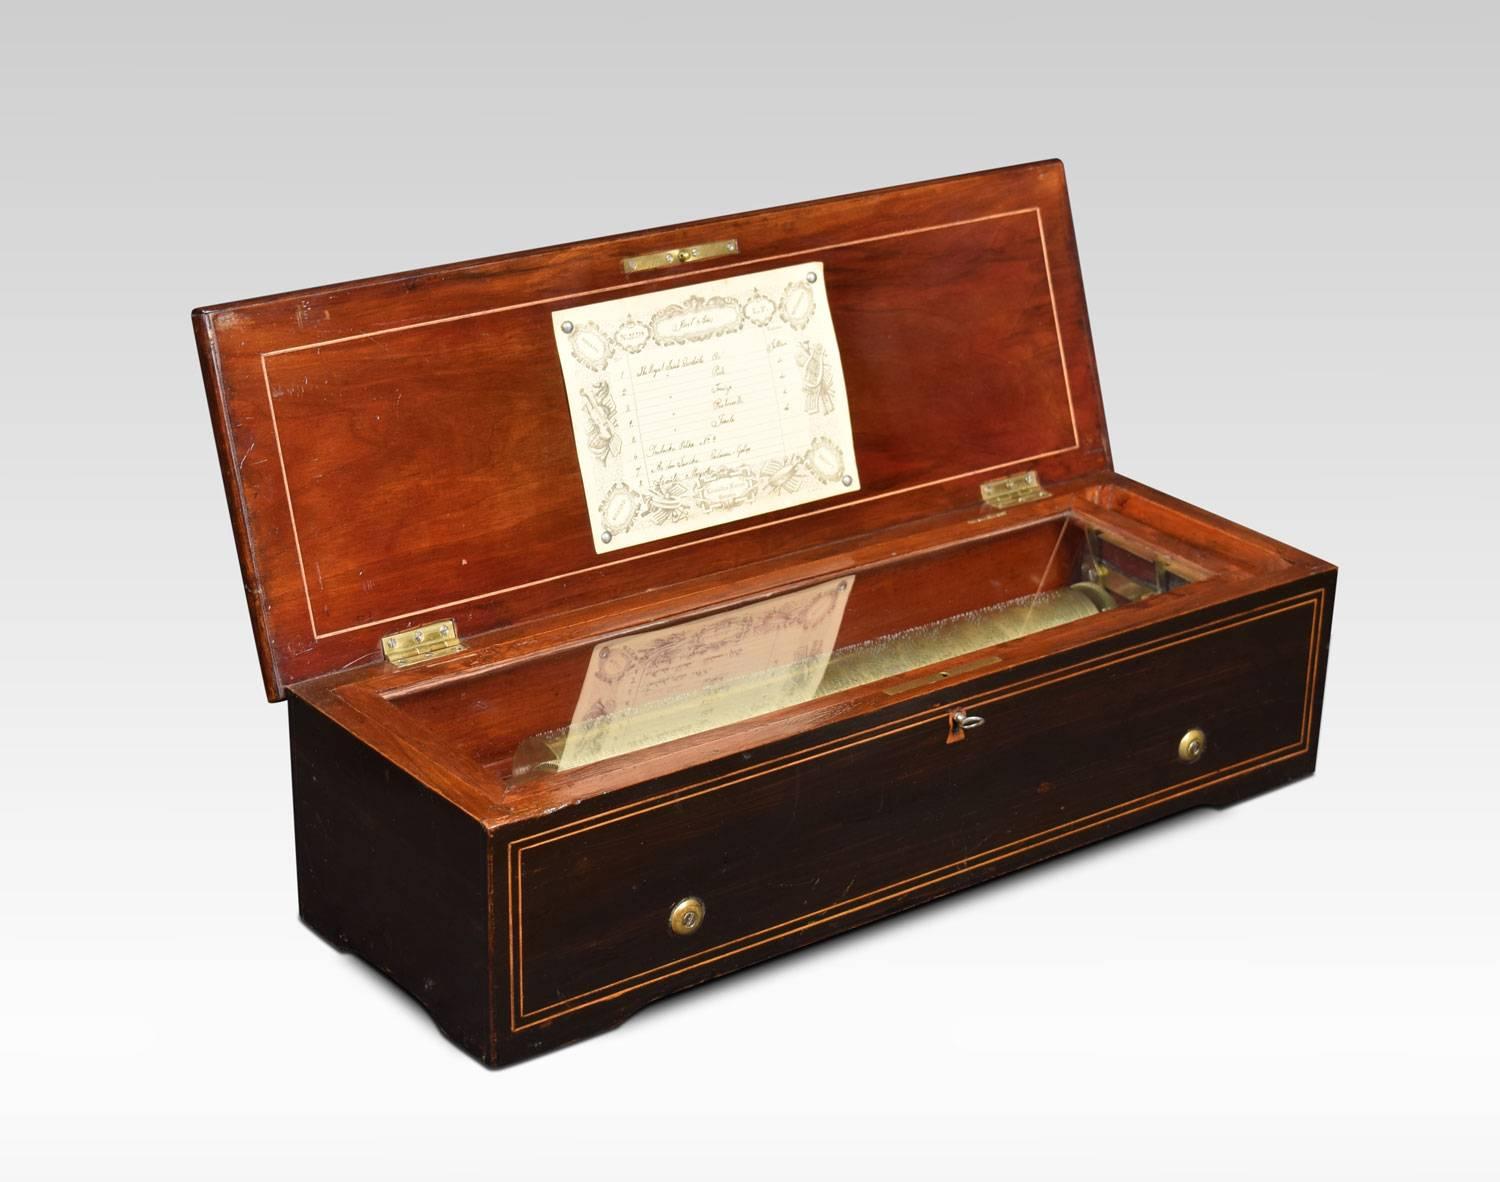 LeCoultre Freres music box playing on eight airs, with original tune sheet, no. 35904 and 13? Cylinder, bearing the maker's name stamped on the comb and the brass bed plate, within a rosewood case, the lid inlaid with boxwood lines and a central